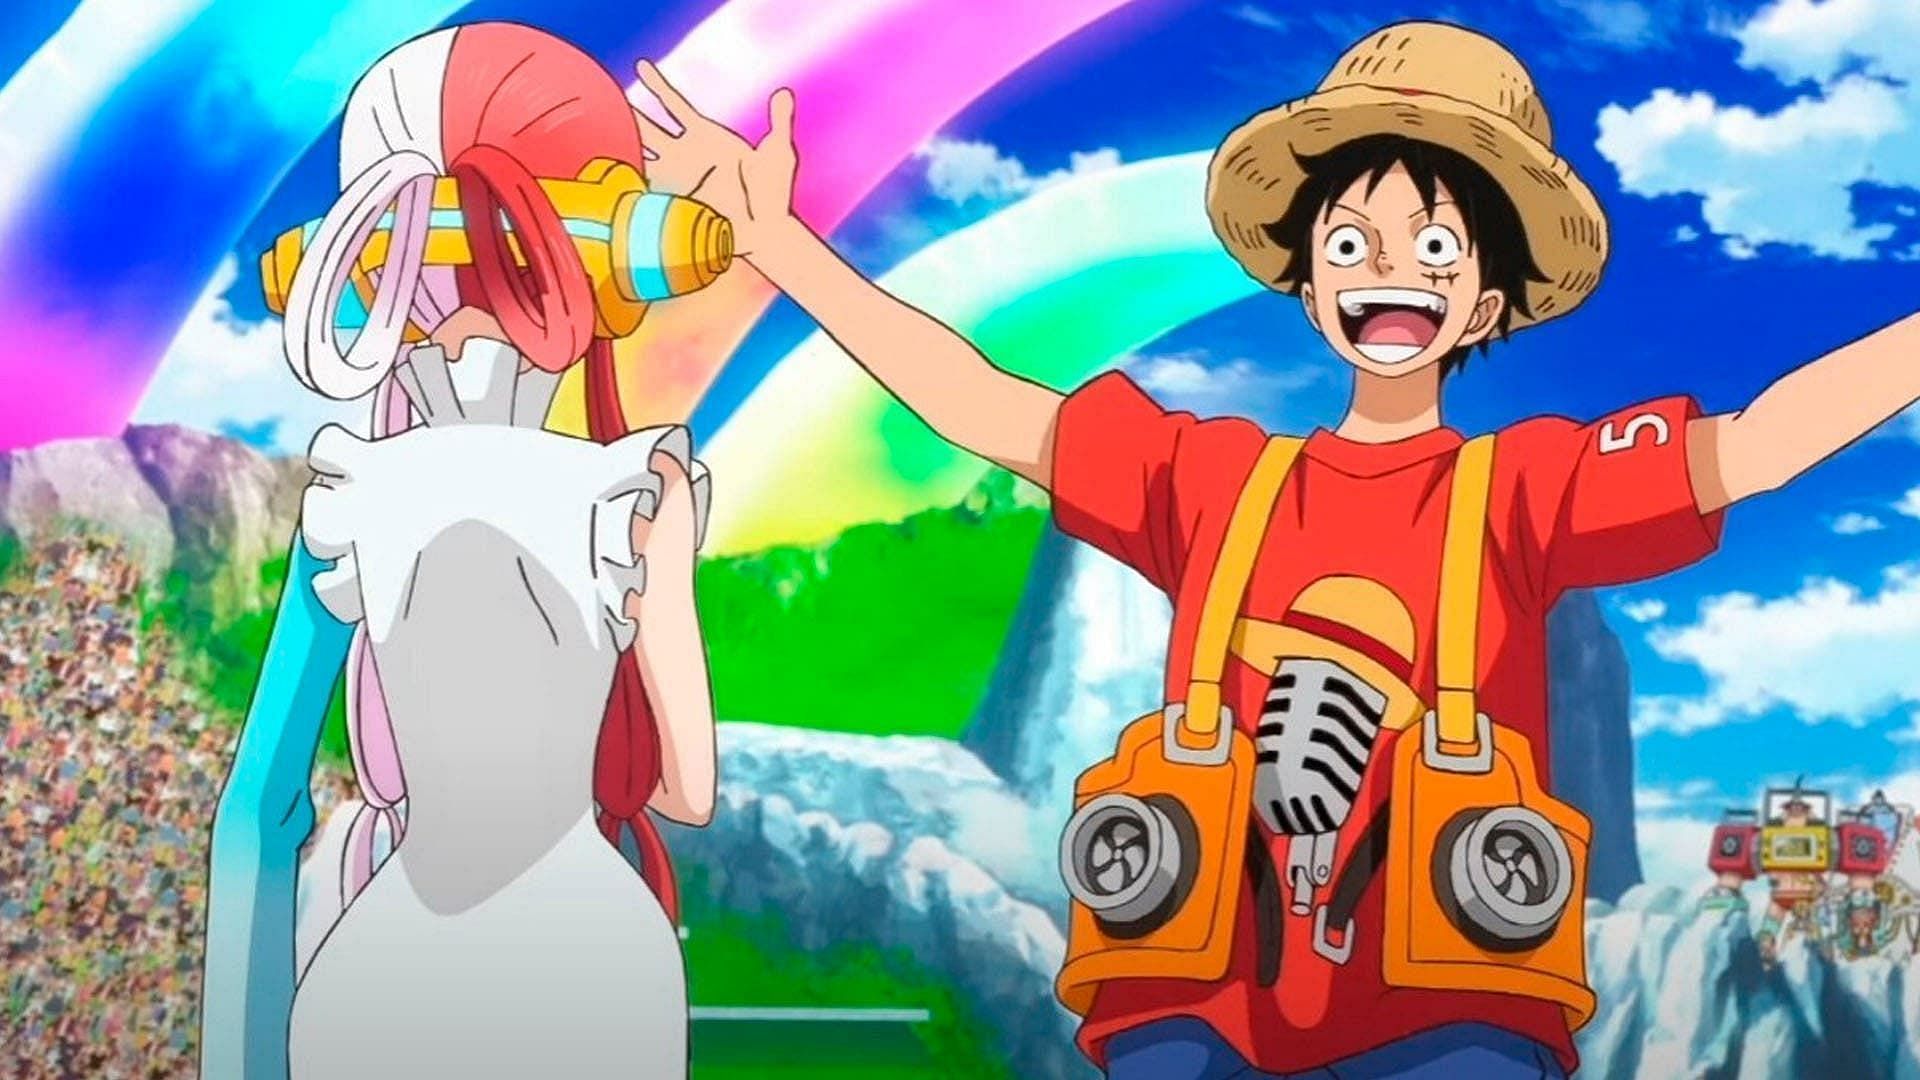 One Piece Film: Red' Comes To Theaters In North America This